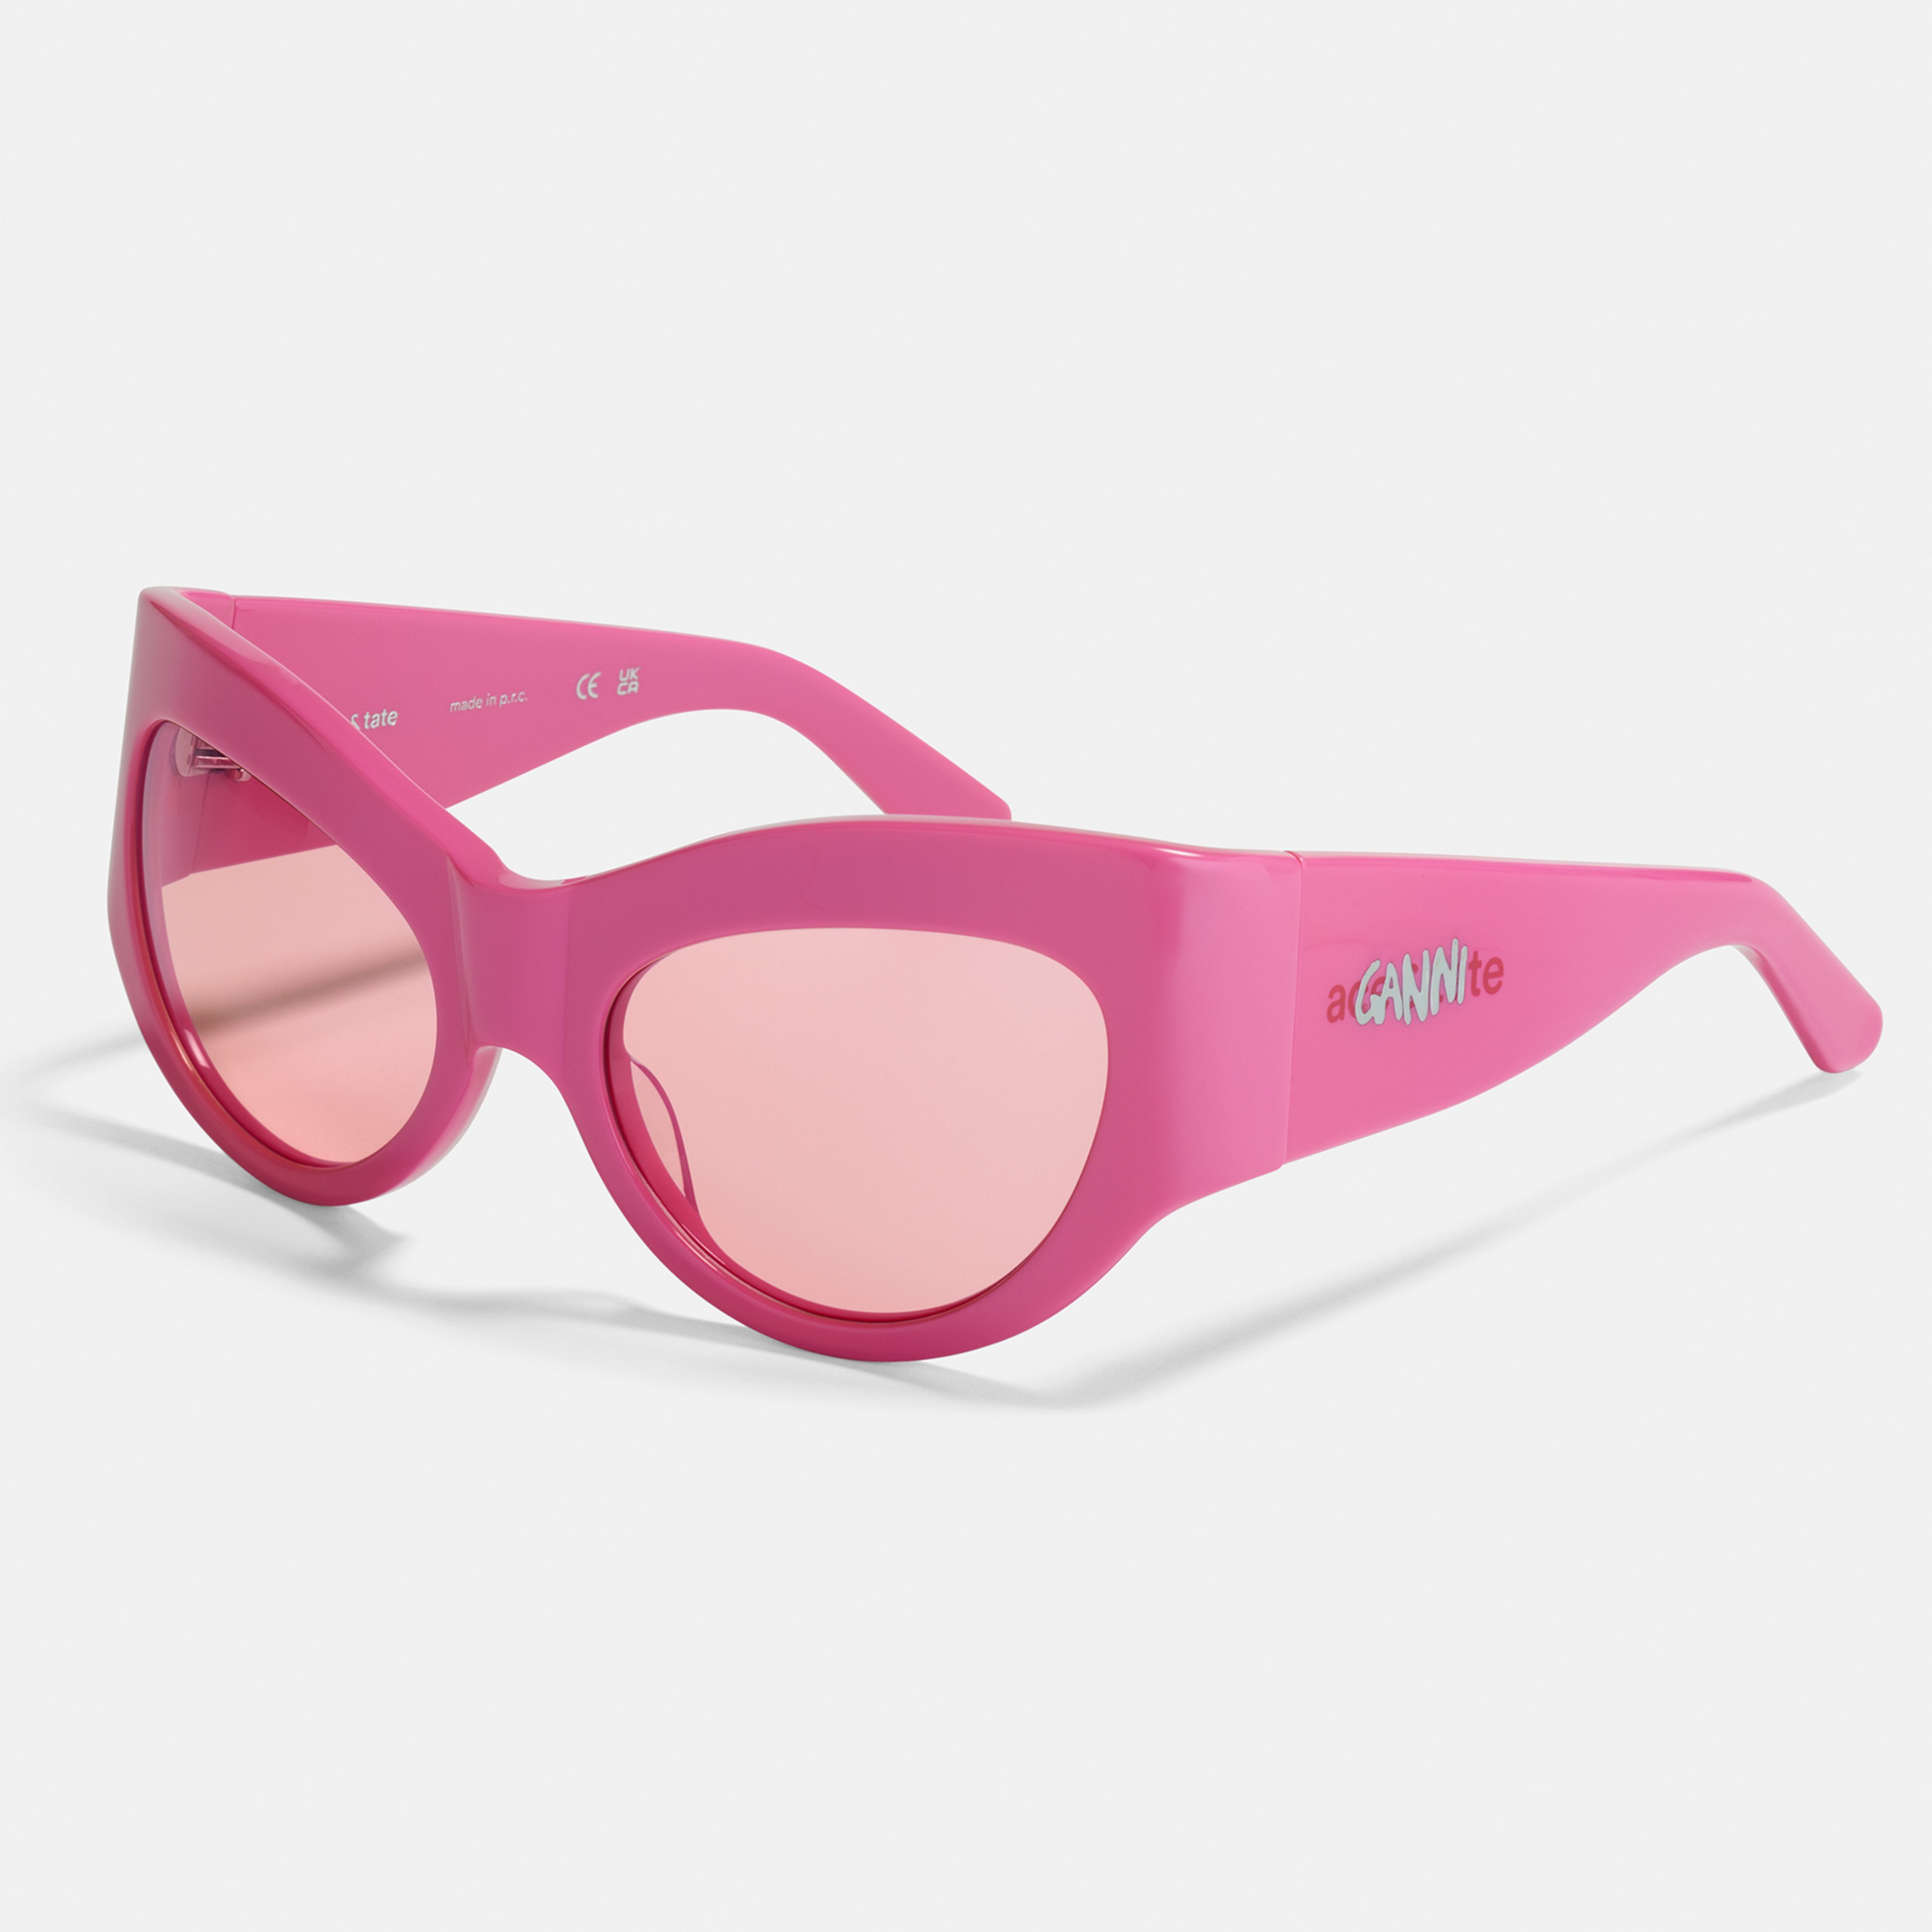 Ace & Tate Solaires | oval Renew bio-acétate in Rose